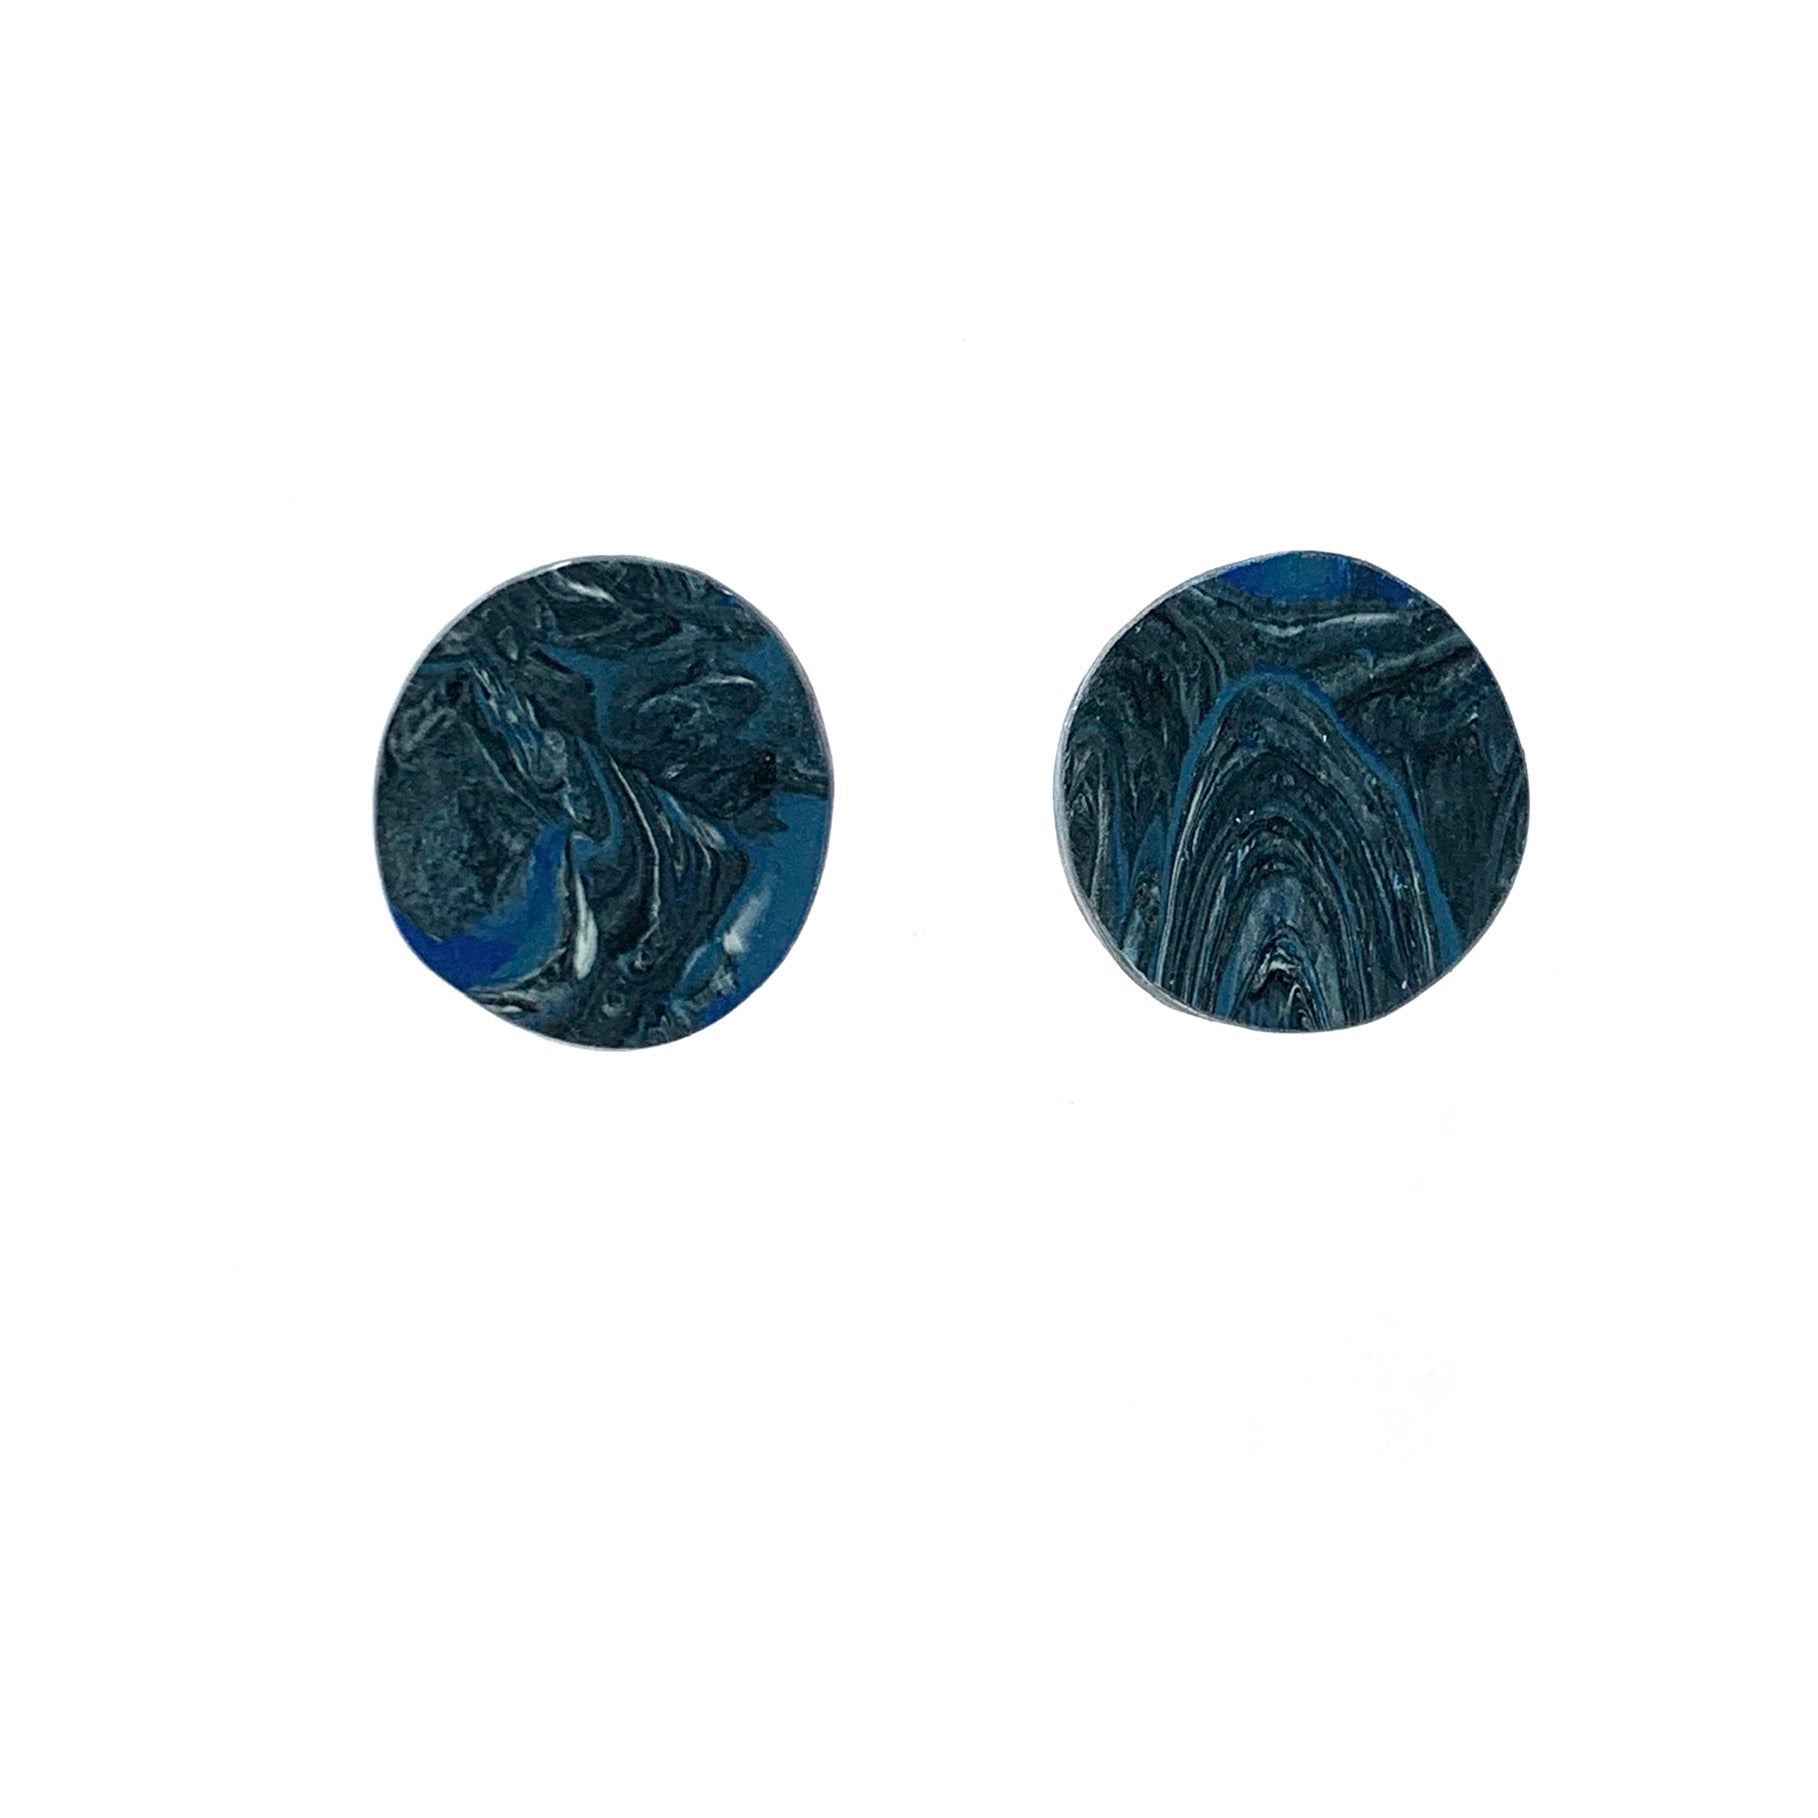 Sustainable Ecofriendly Jewellery Studs Earrings Blue nave handmade recycled